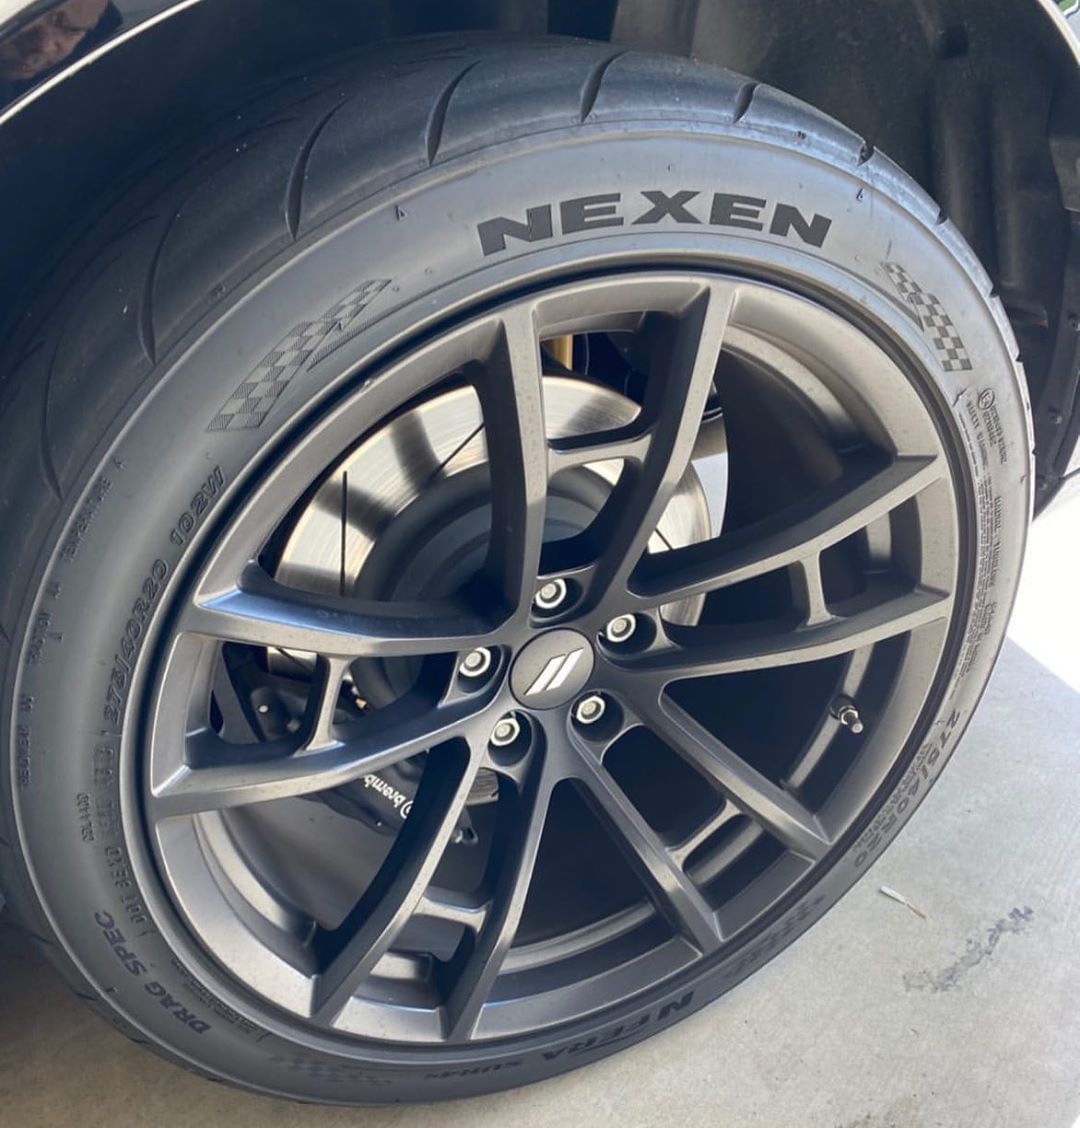 Nexen Tires Review and Buyer's Guide - Auto Quarterly